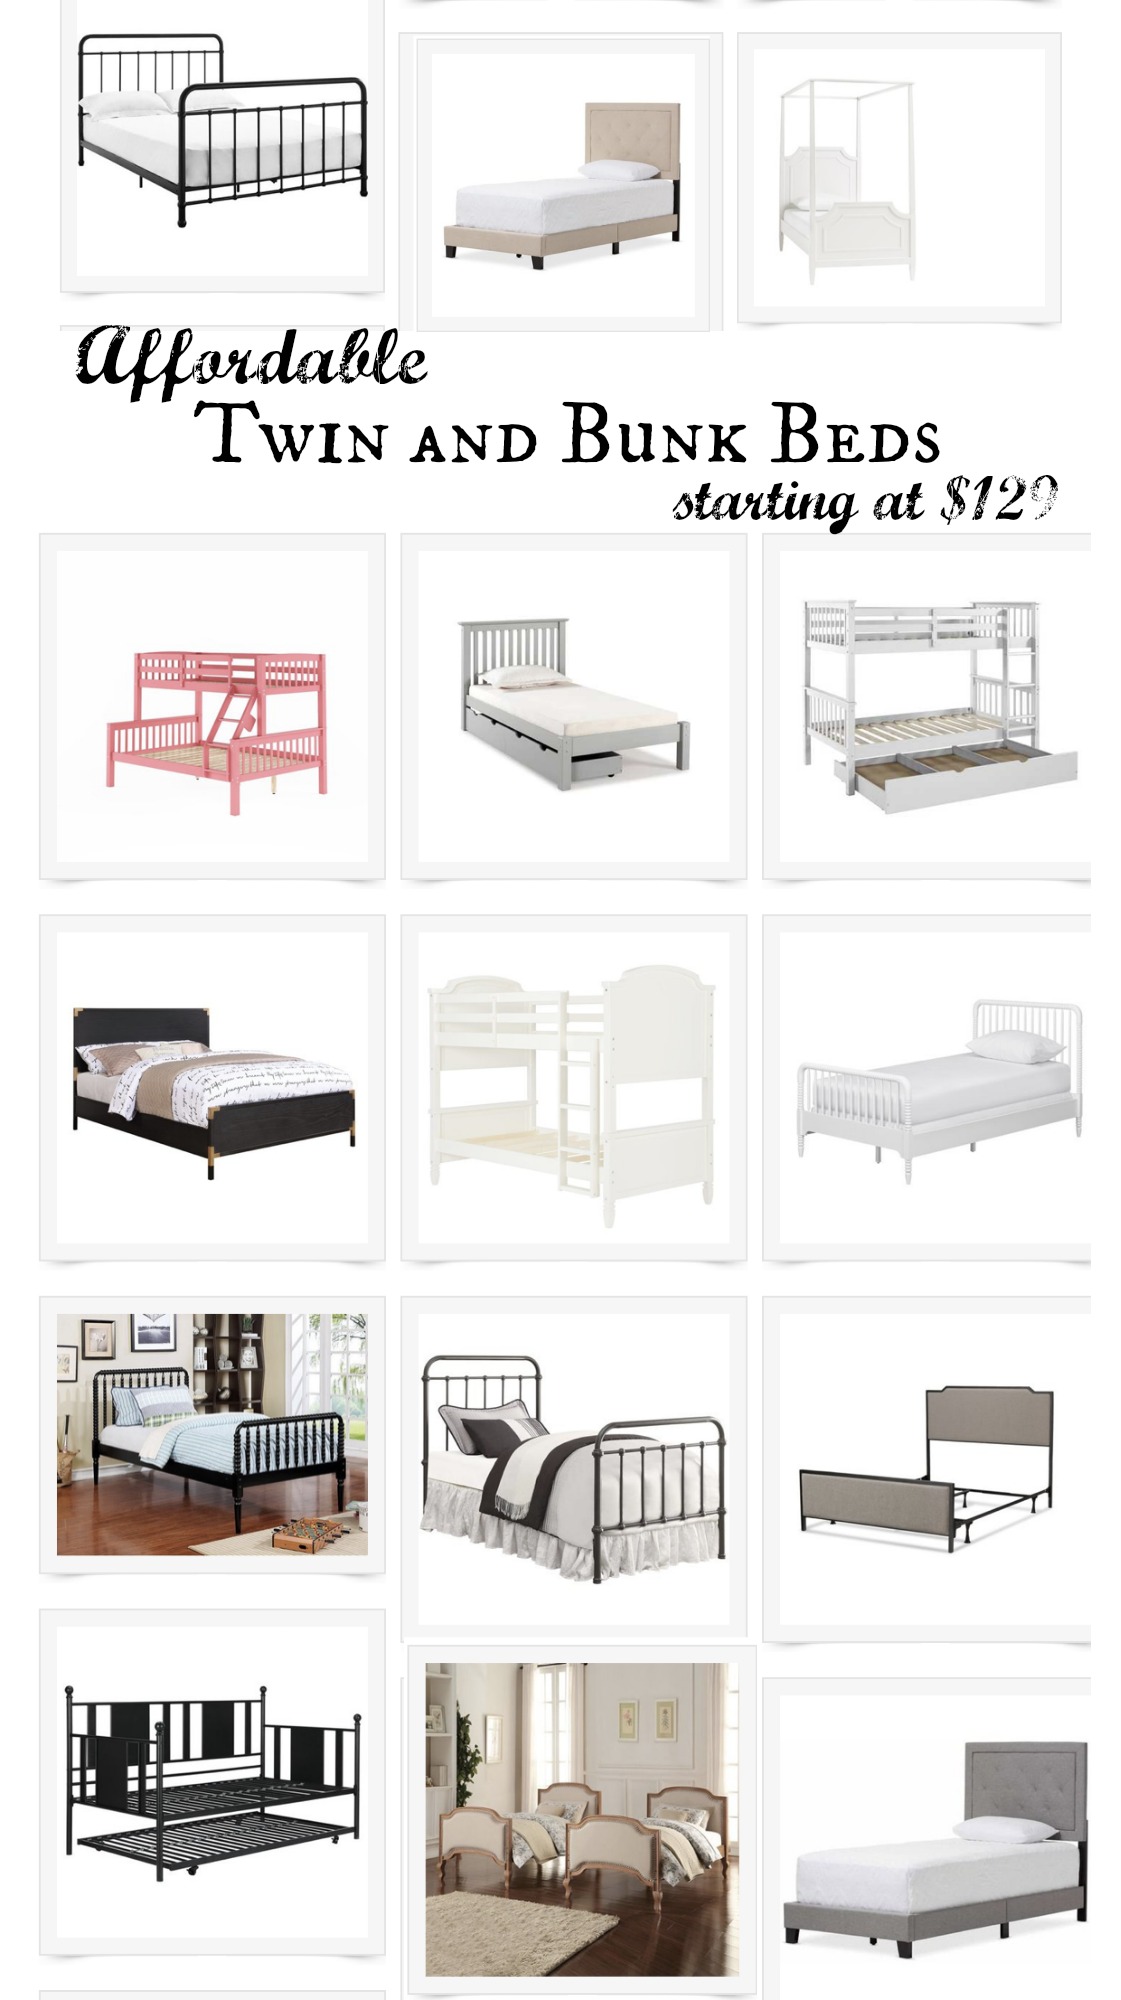 Affordable Twin and Bunk Beds- Starting at $129